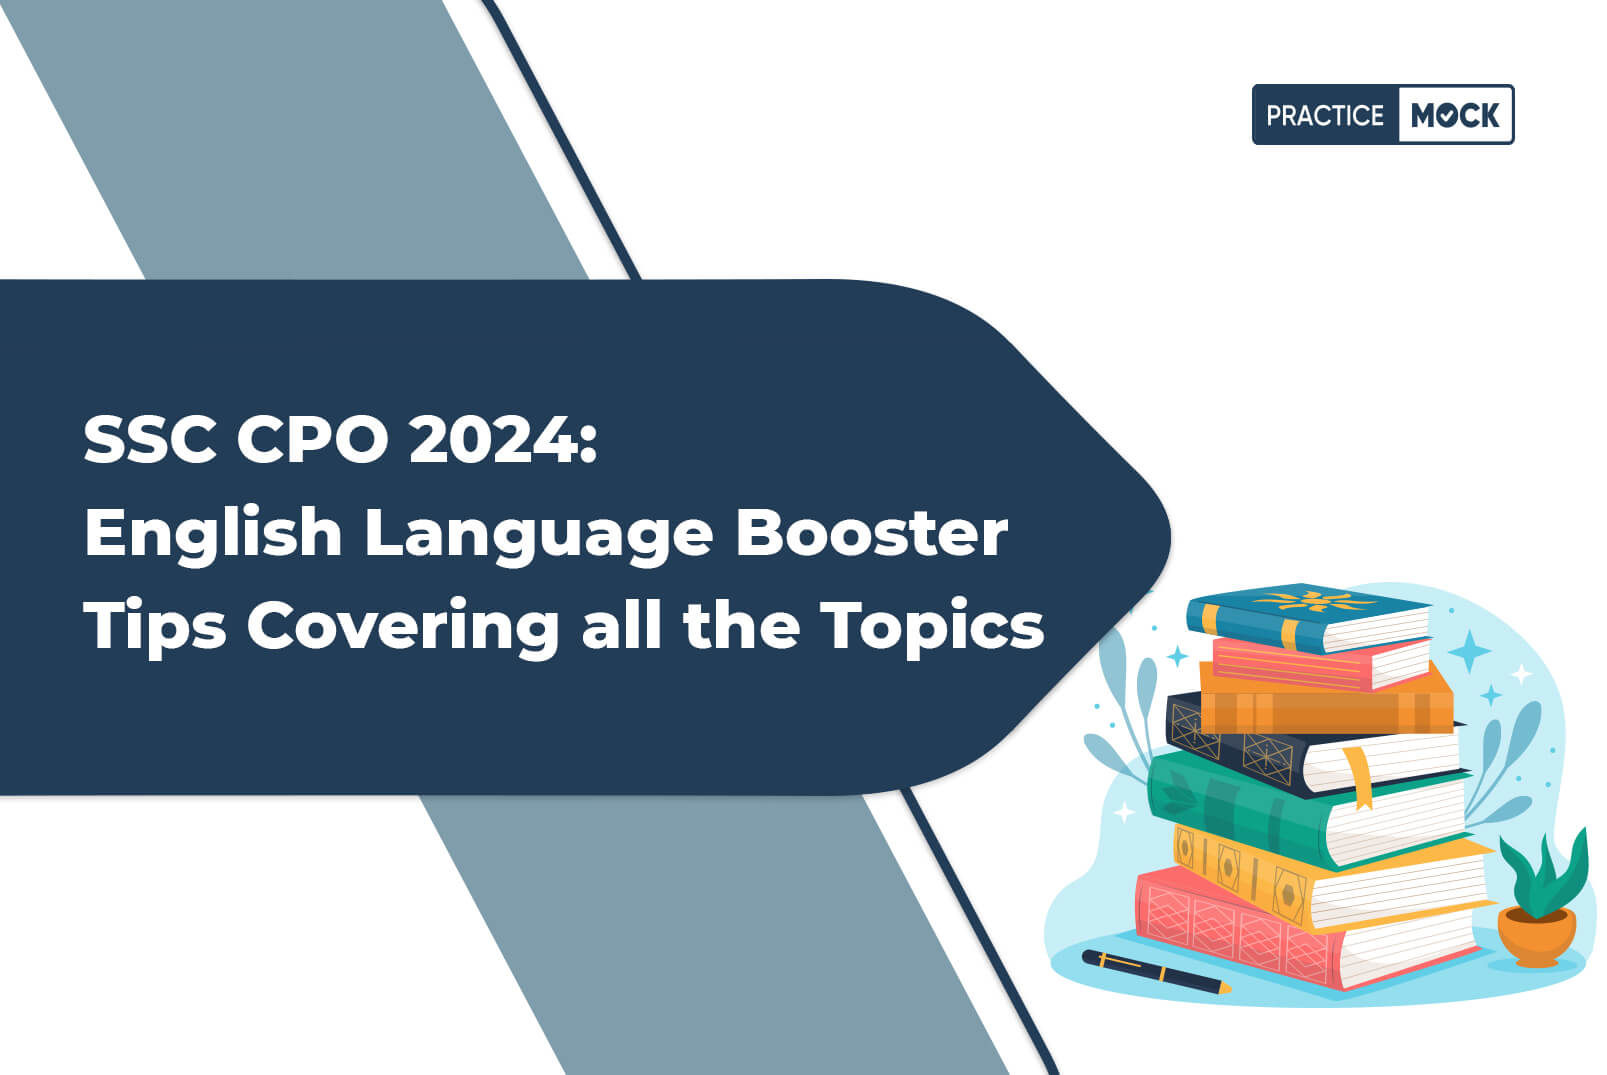 SSC CPO 2024: English Language Booster Tips Covering all the Topics